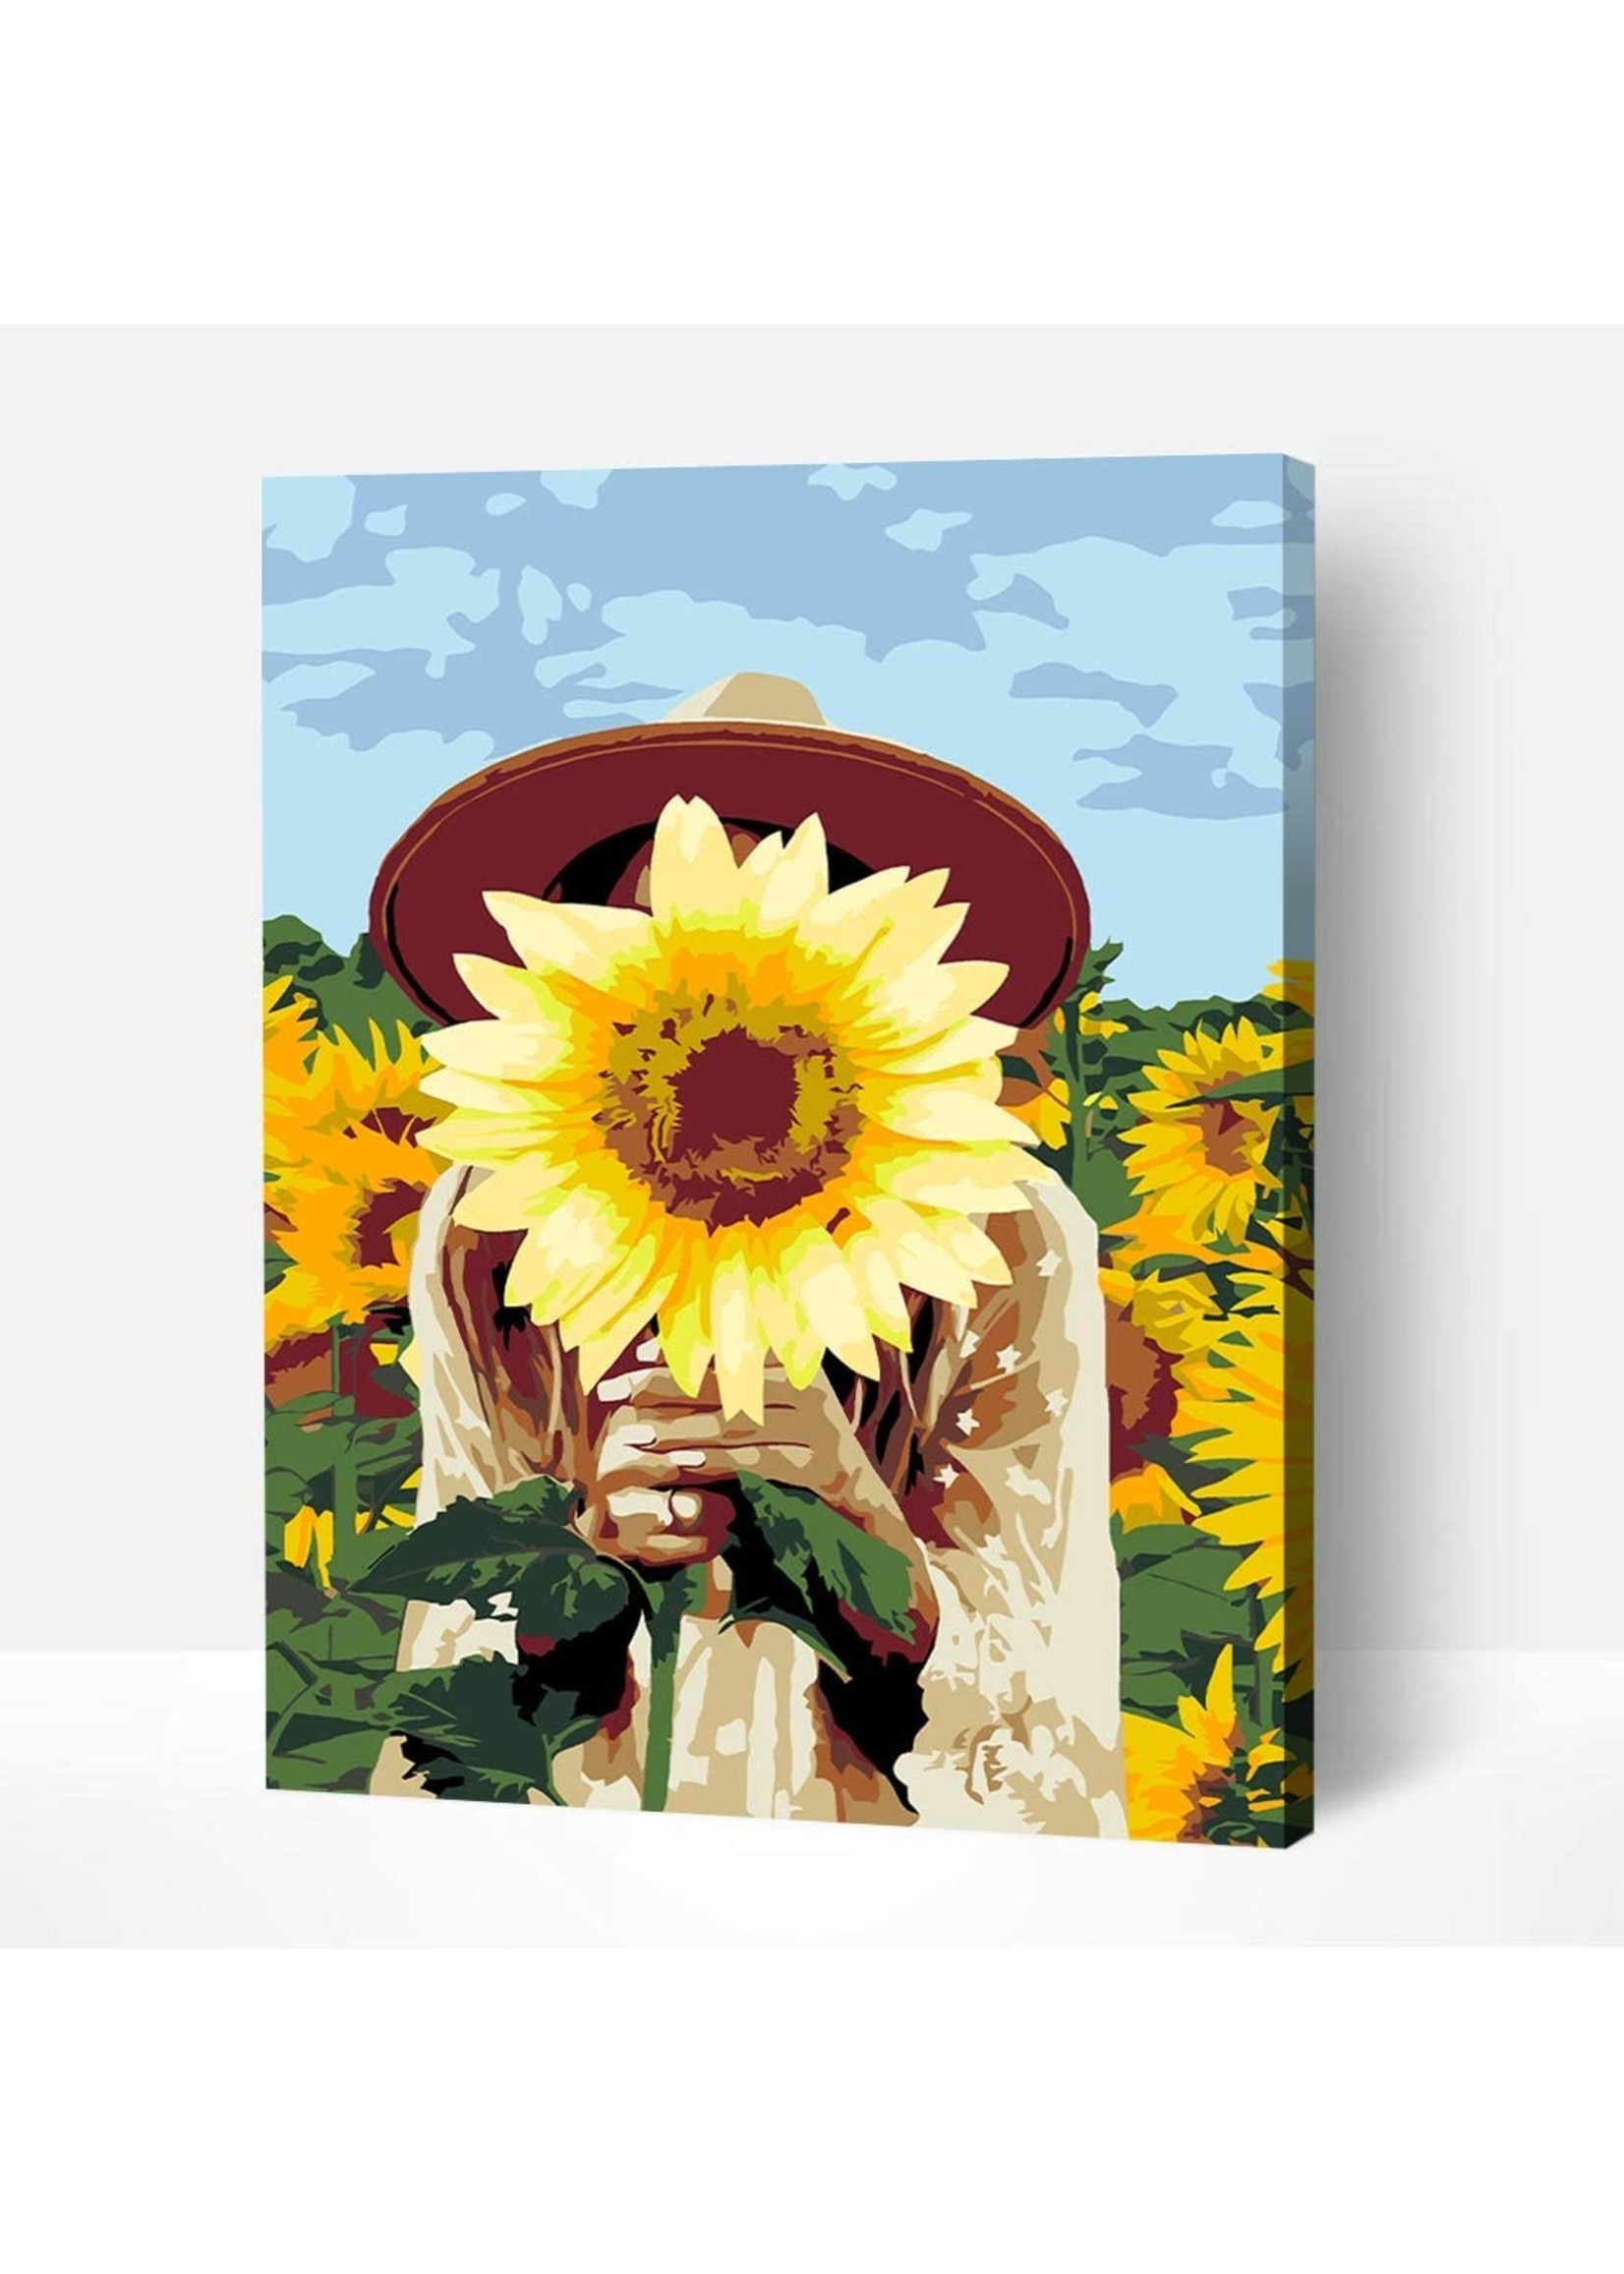 Wise Elk Artwille - Girl with Sunflower DIY Paint by Numbers